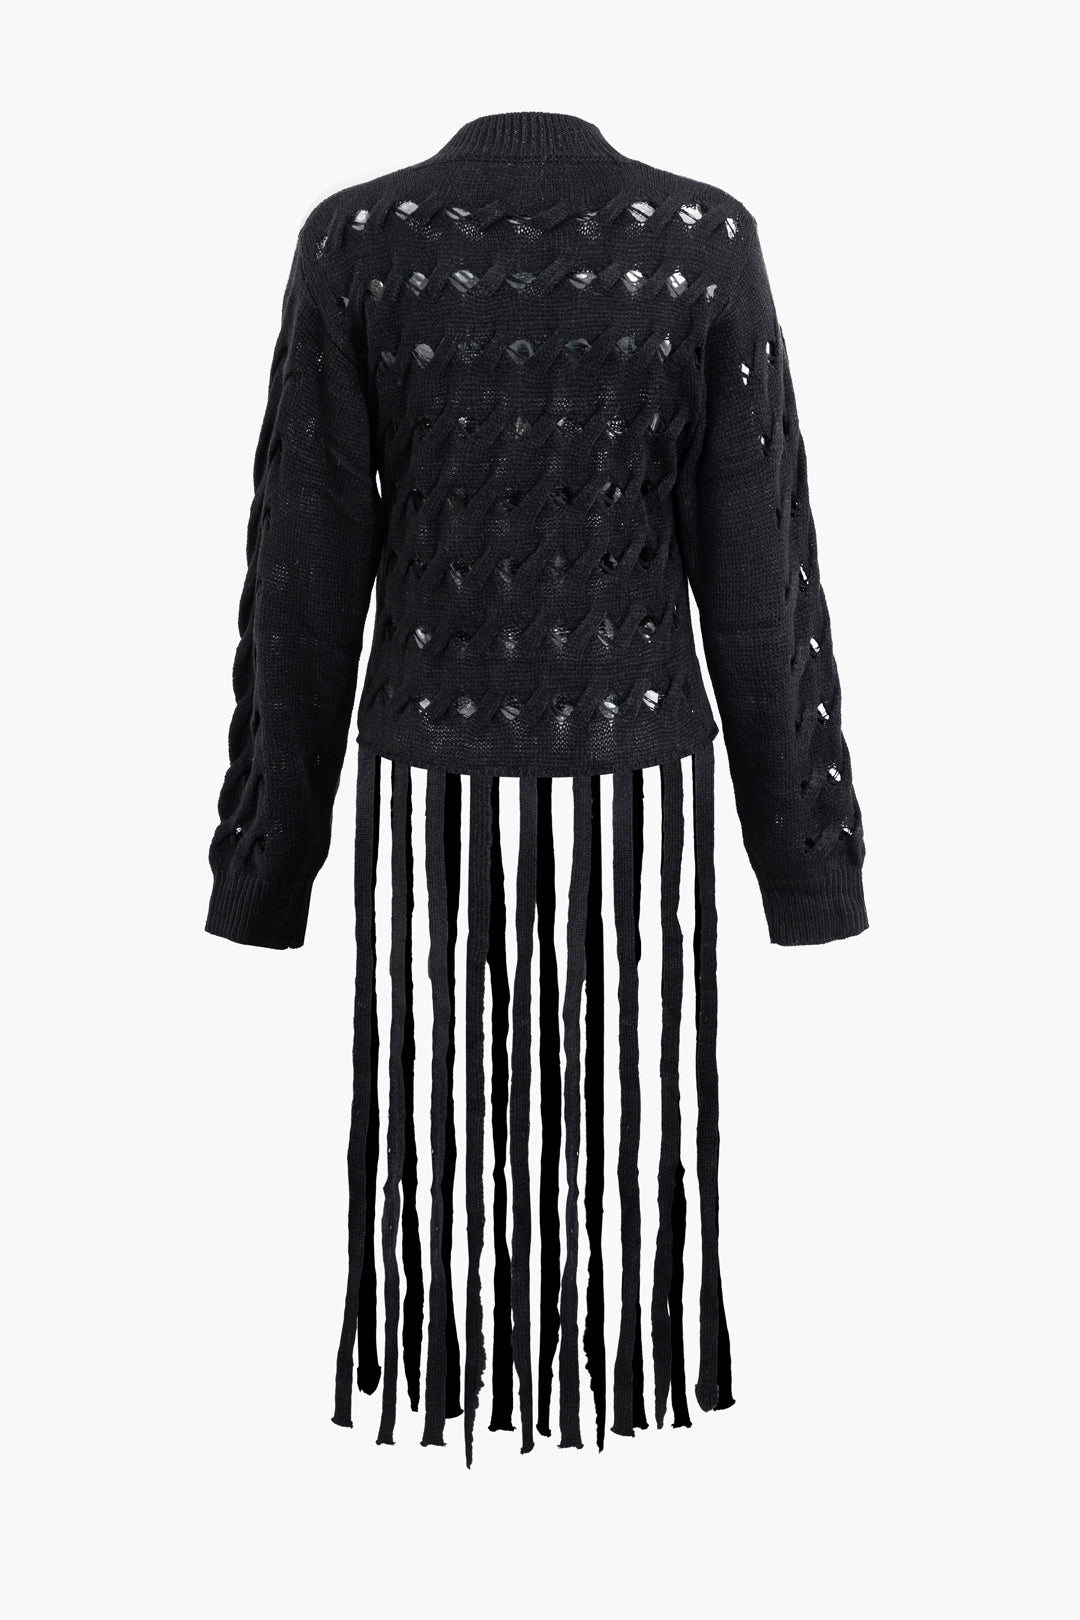 Mock Neck Cut Out Braided Texture Fringe Knit Top